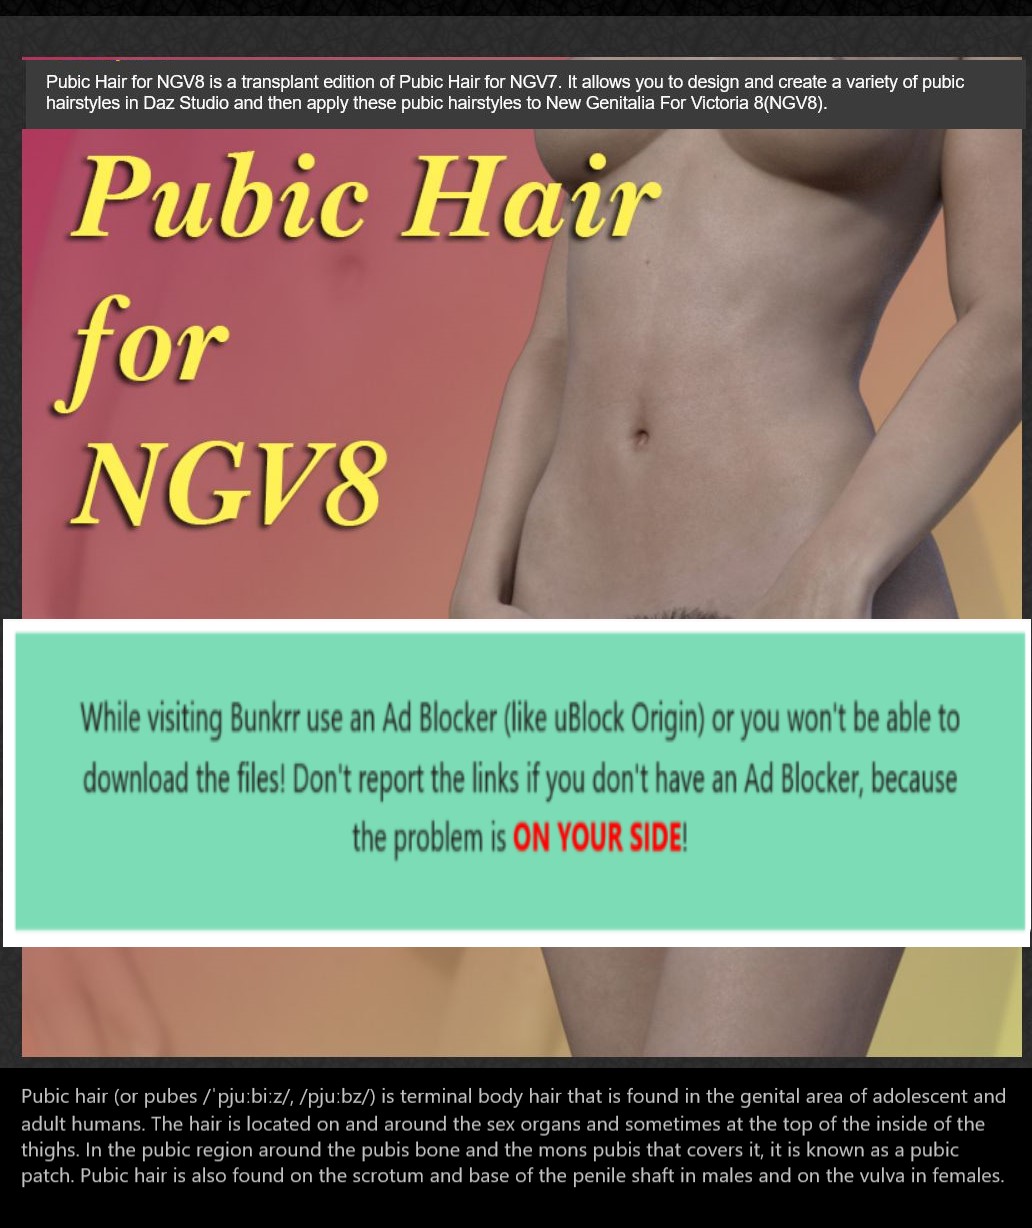 Pubic Hair For NGV8